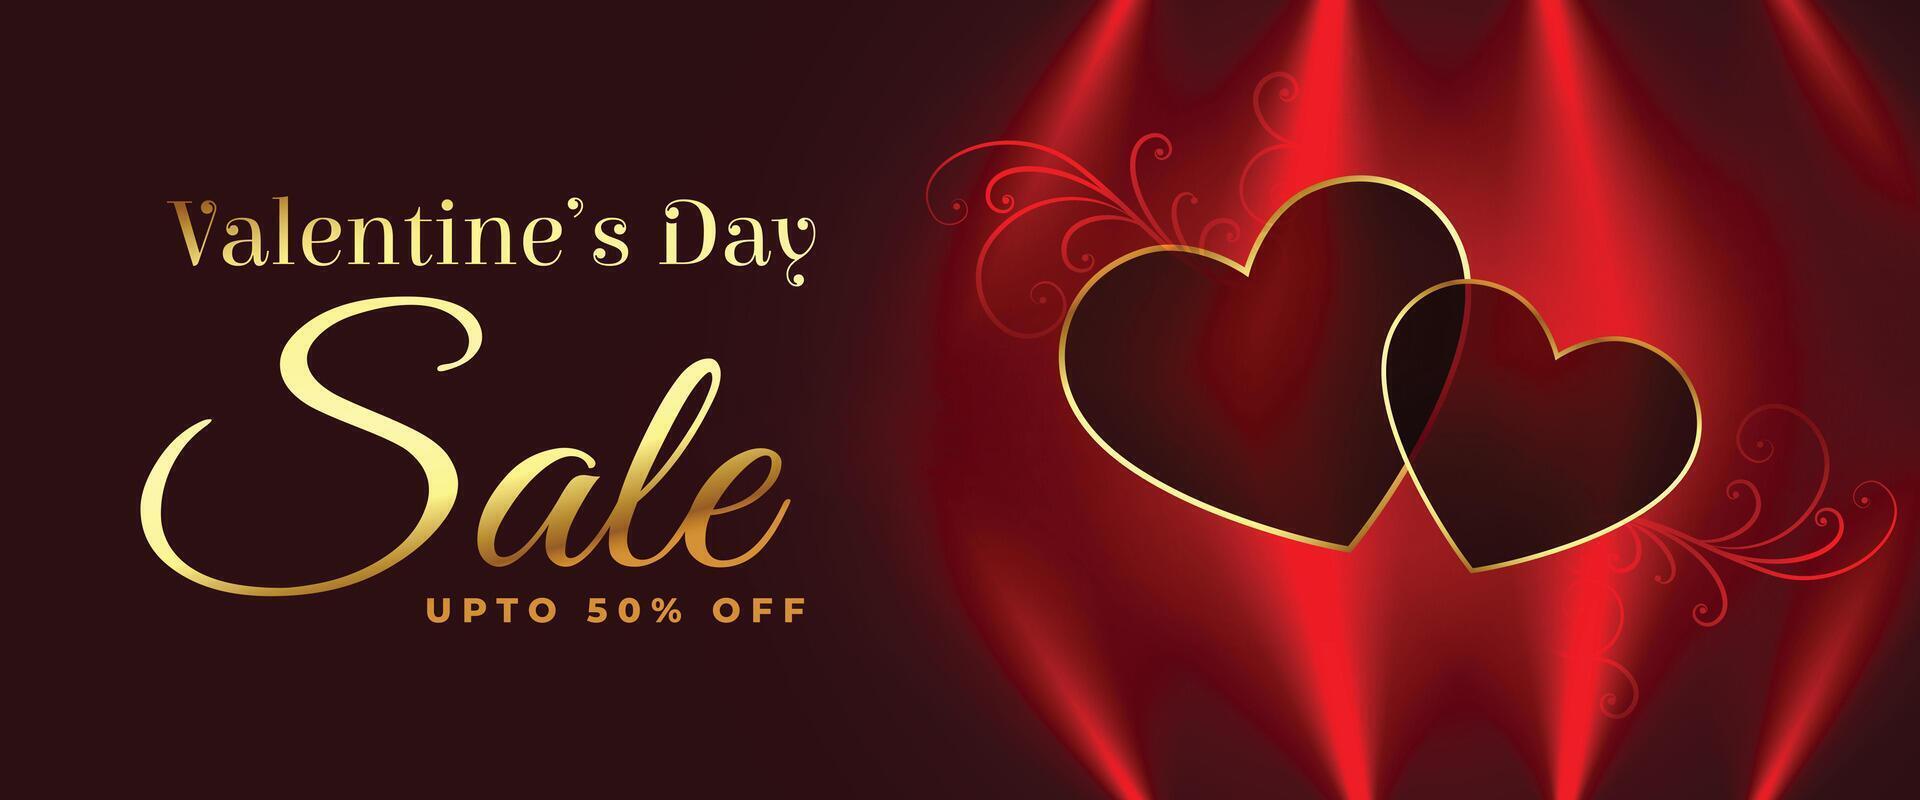 valentines day sale and discount banner with couple hearts vector